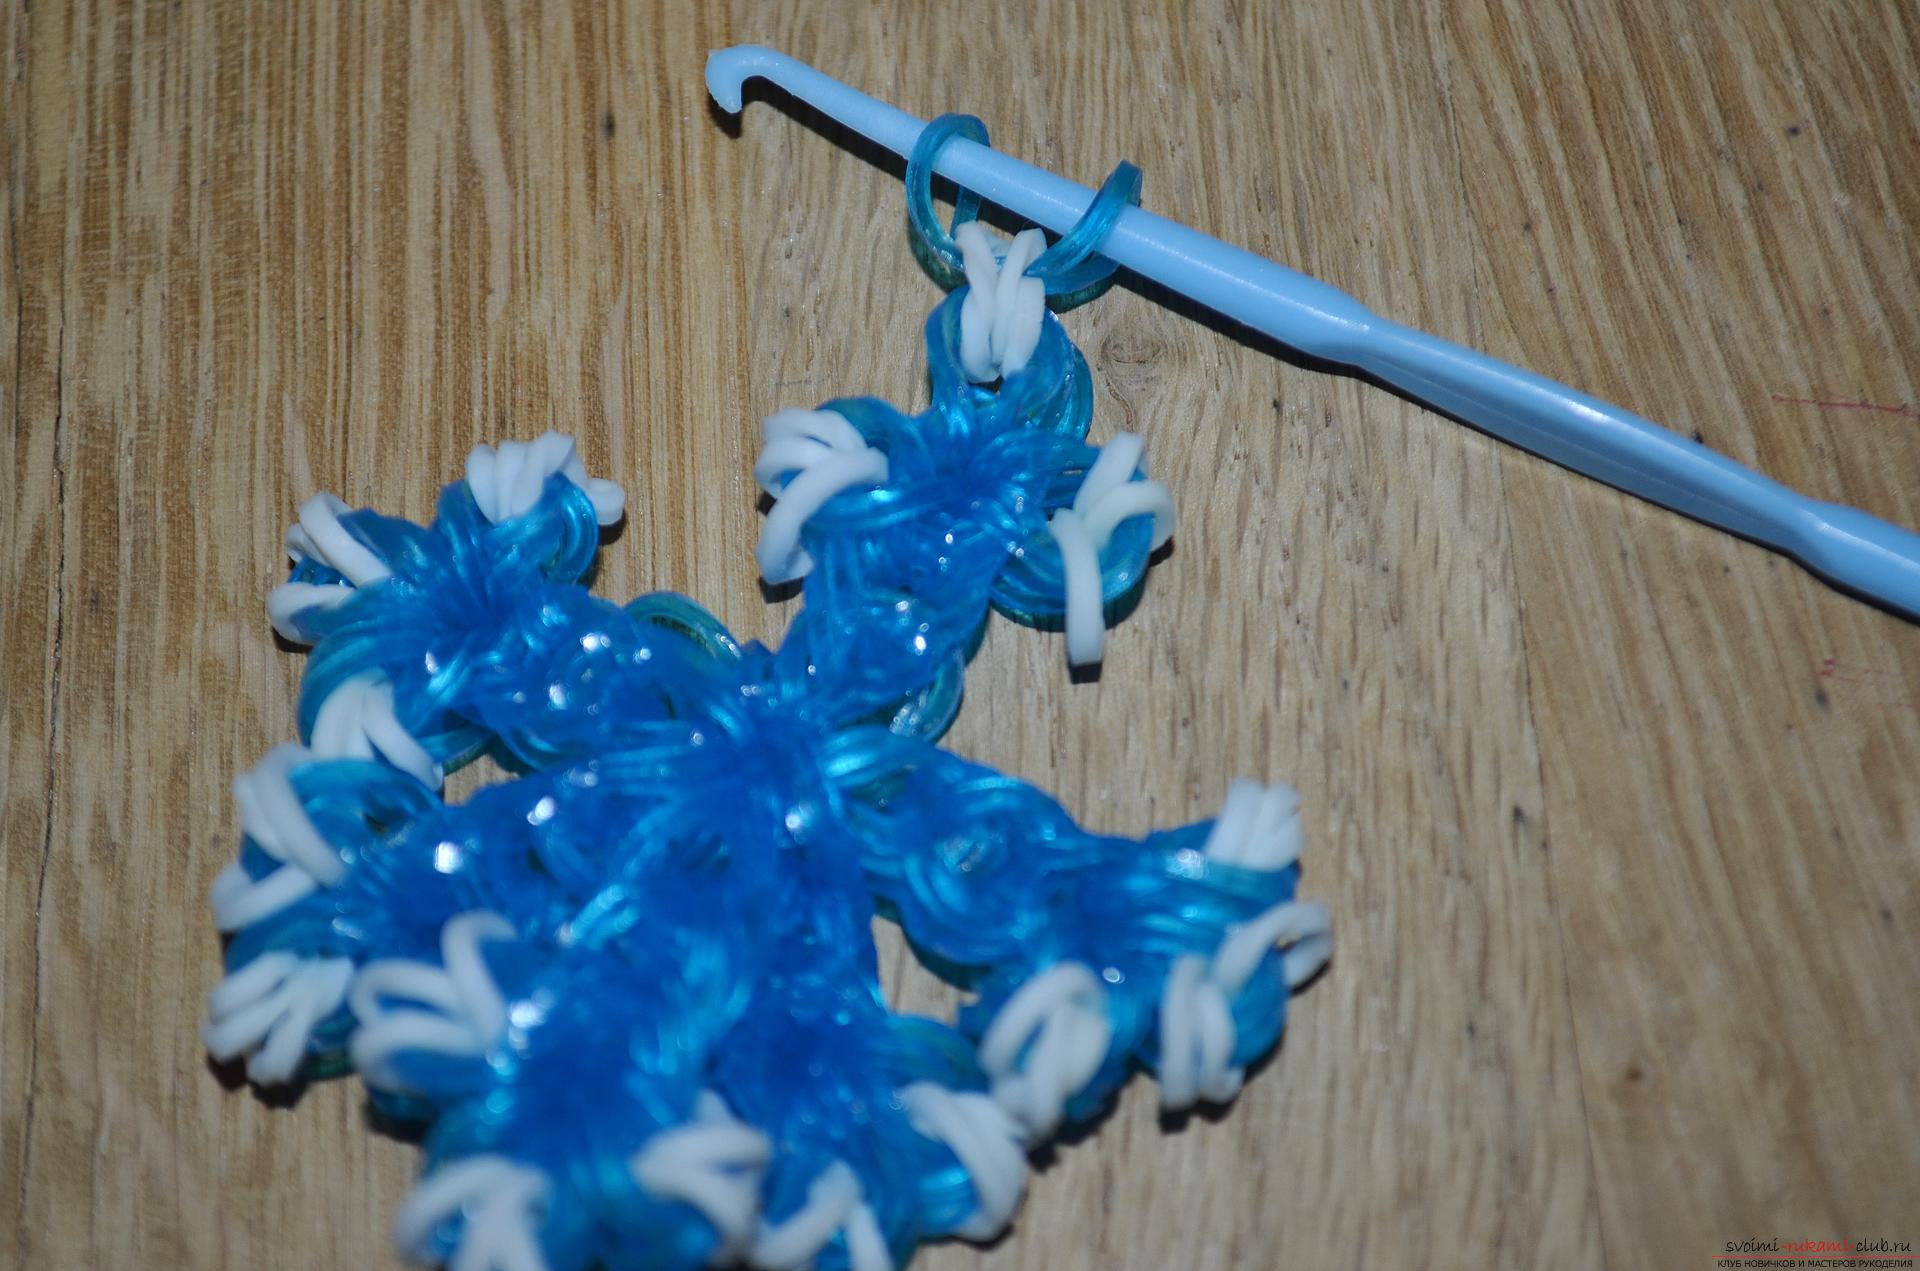 Photo for a lesson on weaving snowflakes from rubber bands. Photo # 23